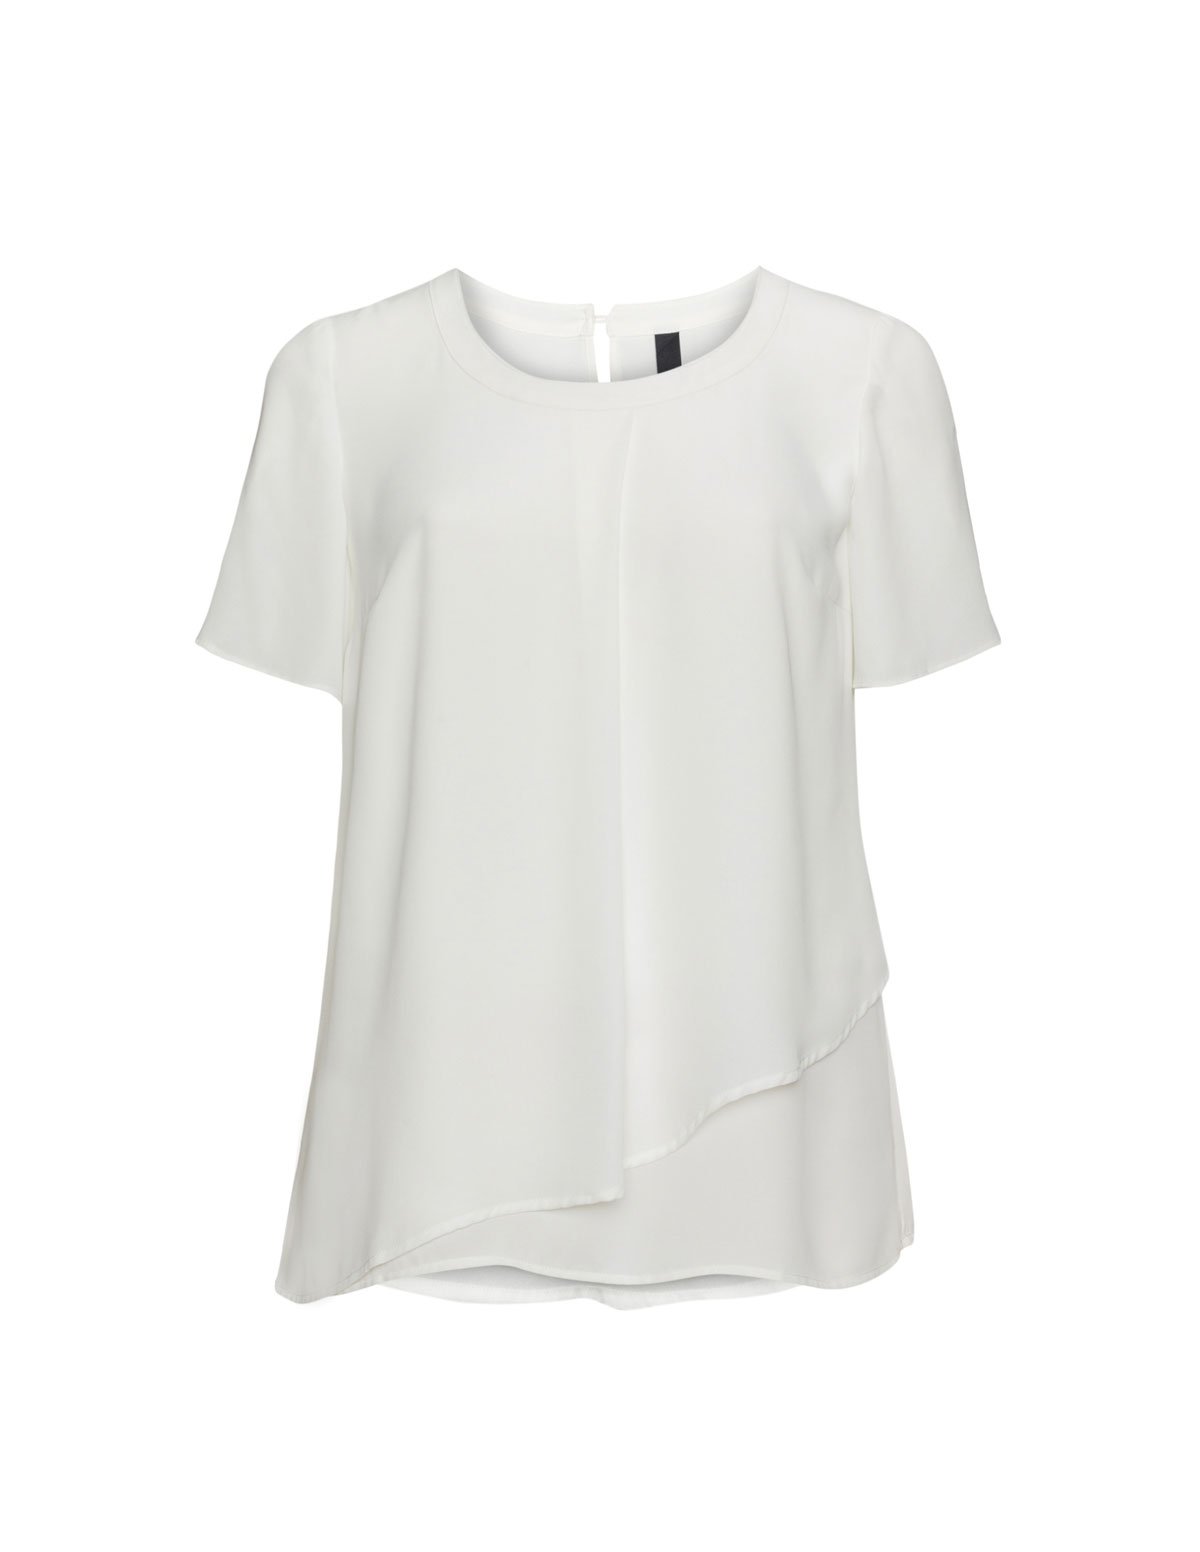 Double layered chiffon top by
Manon Baptiste